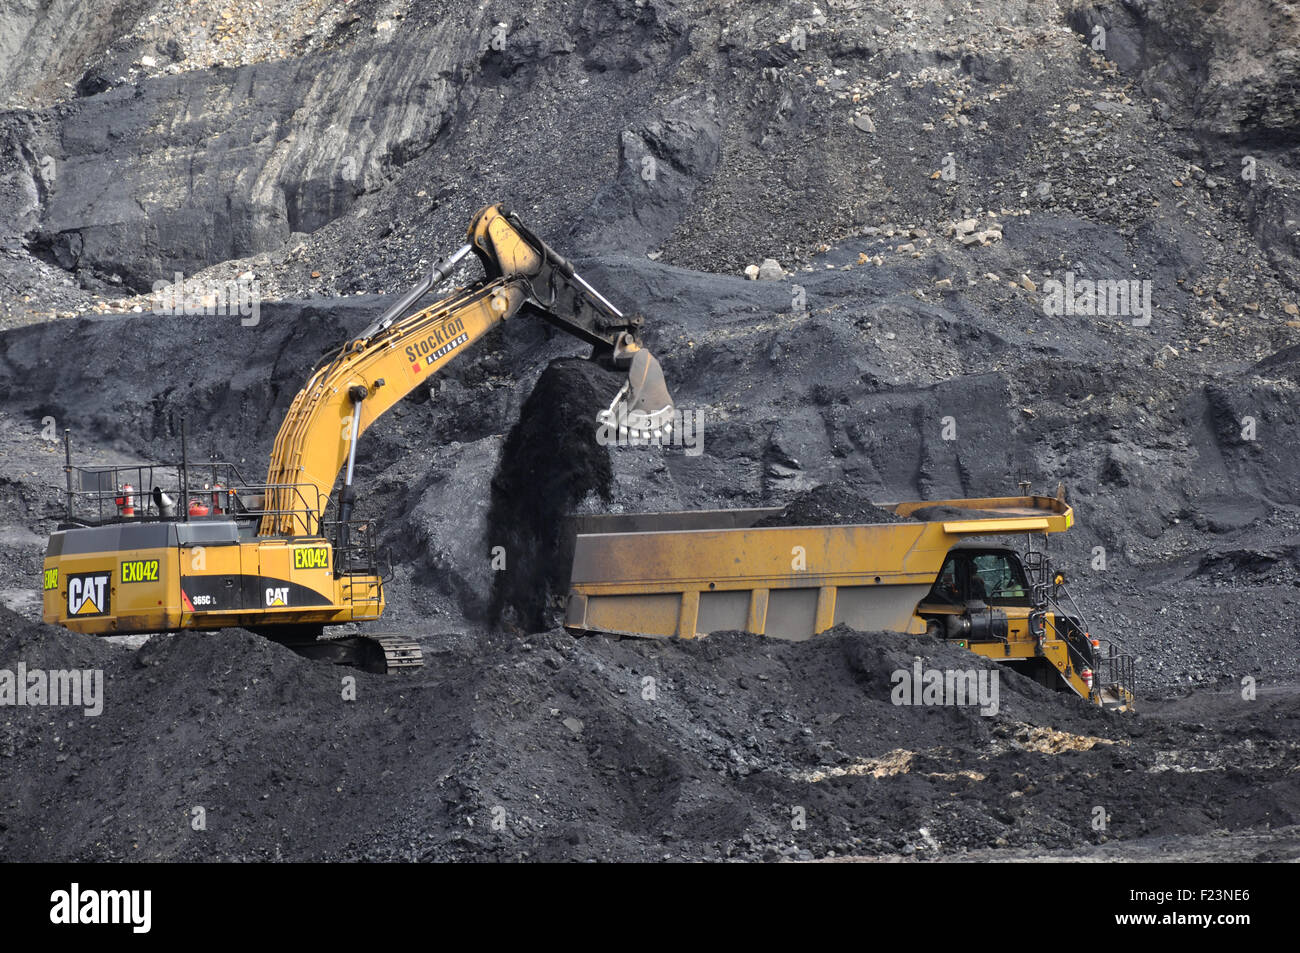 WESTPORT, NEW ZEALAND,AUGUST 31, 2013: A 40 ton digger loads coal into a truck at Stockton open cast coal mine Stock Photo